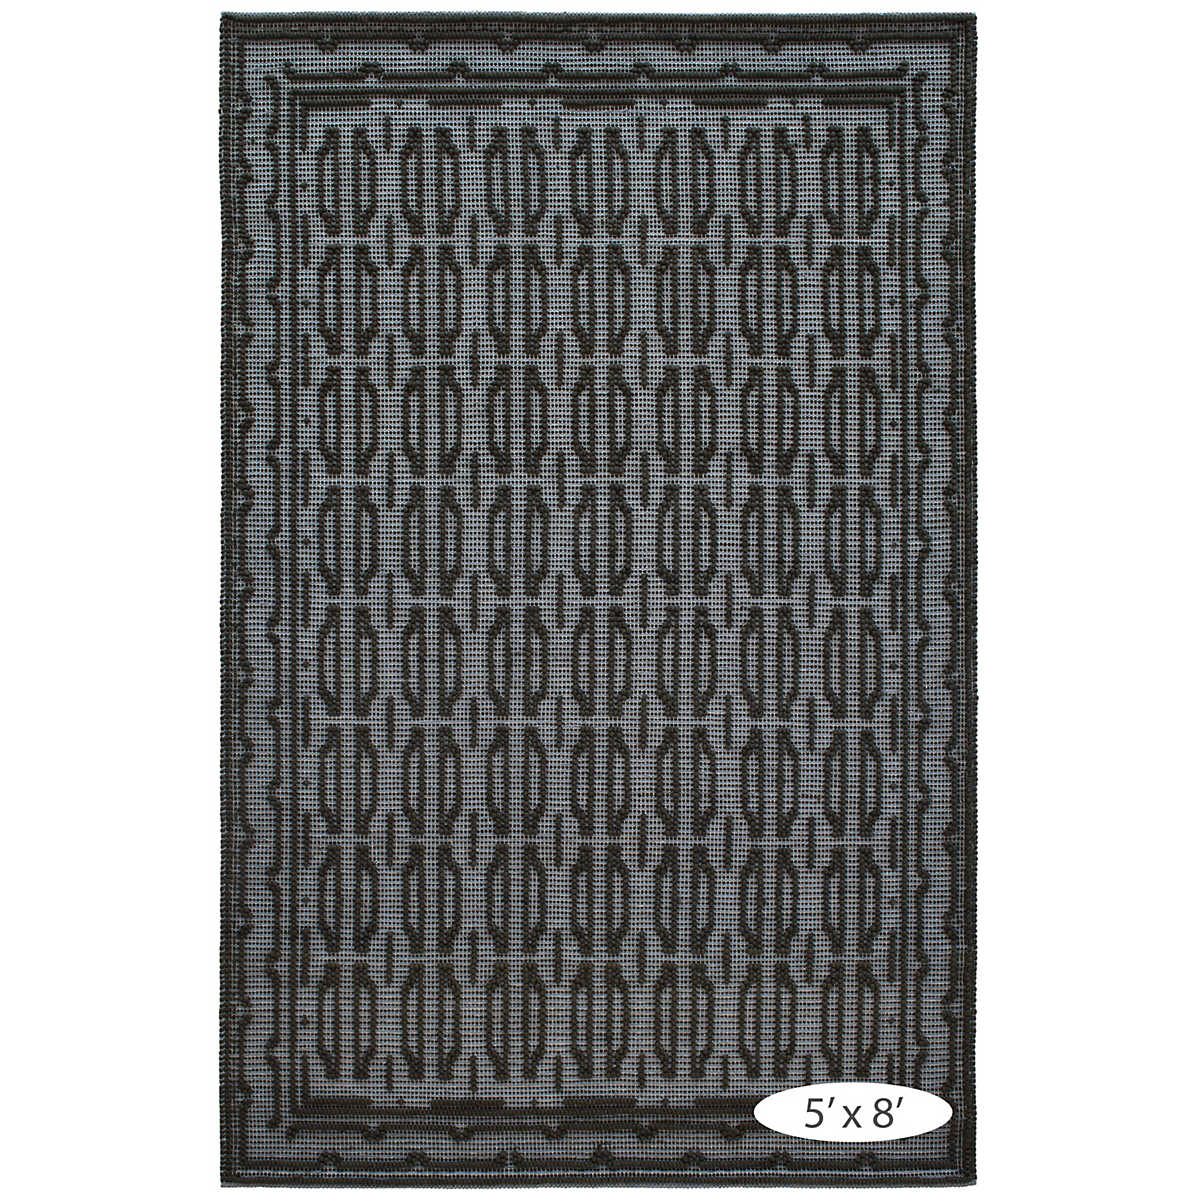 The Campbell Iron Rug relief pattern plays across a gently marled woven wool ground, accentuating the graphic dimension created by the different weaves. The central motif is repeated inversely to create a border around this sumptuous rug. Amethyst Home provides interior design services, furniture, rugs, and lighting in the Des Moines metro area.